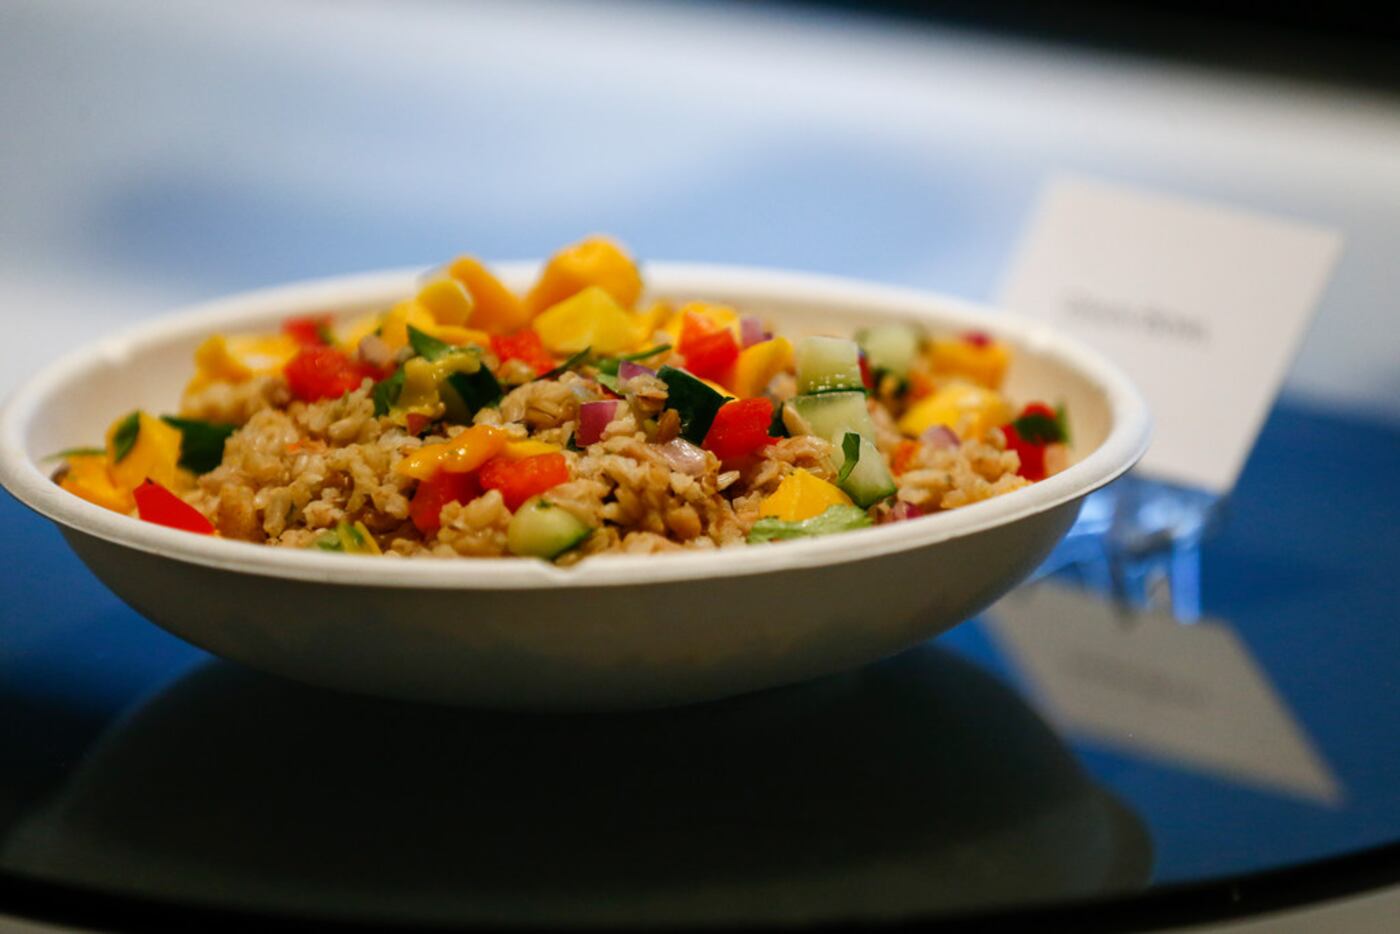 A grain bowl is now on the menu during Dallas Cowboys football games.